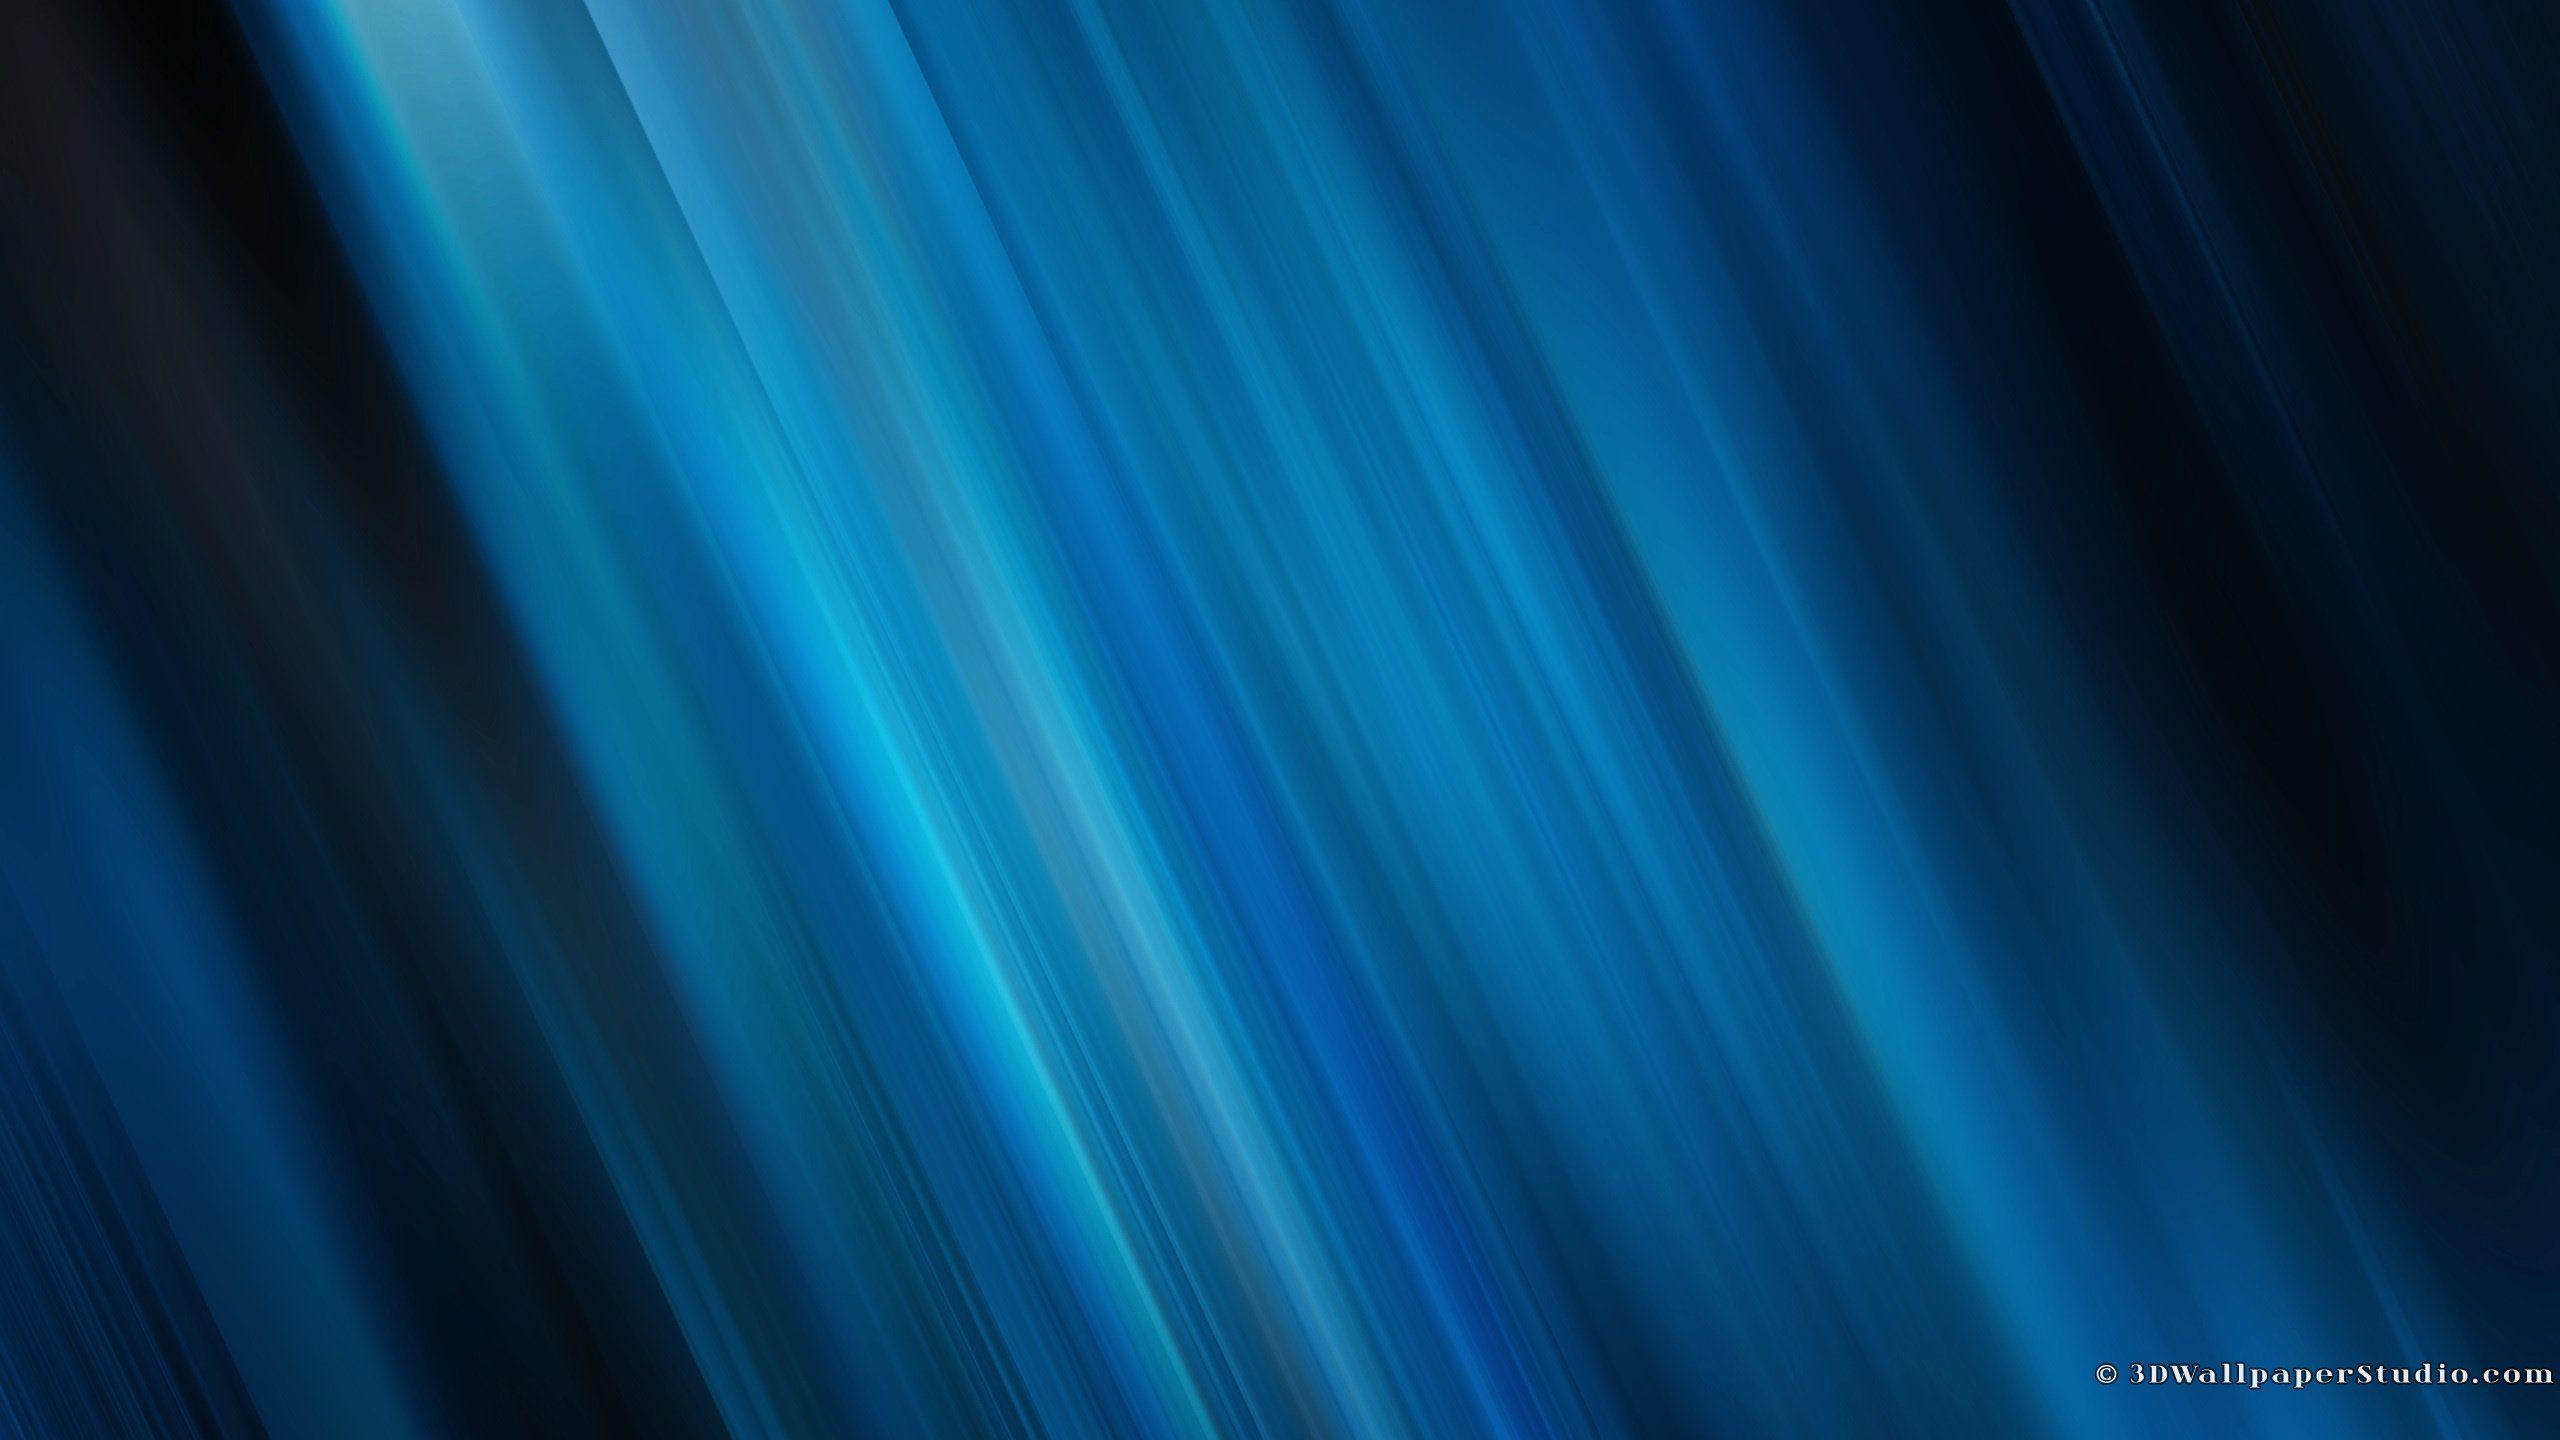 Free Cool Blue Wallpaper High Quality Resolution